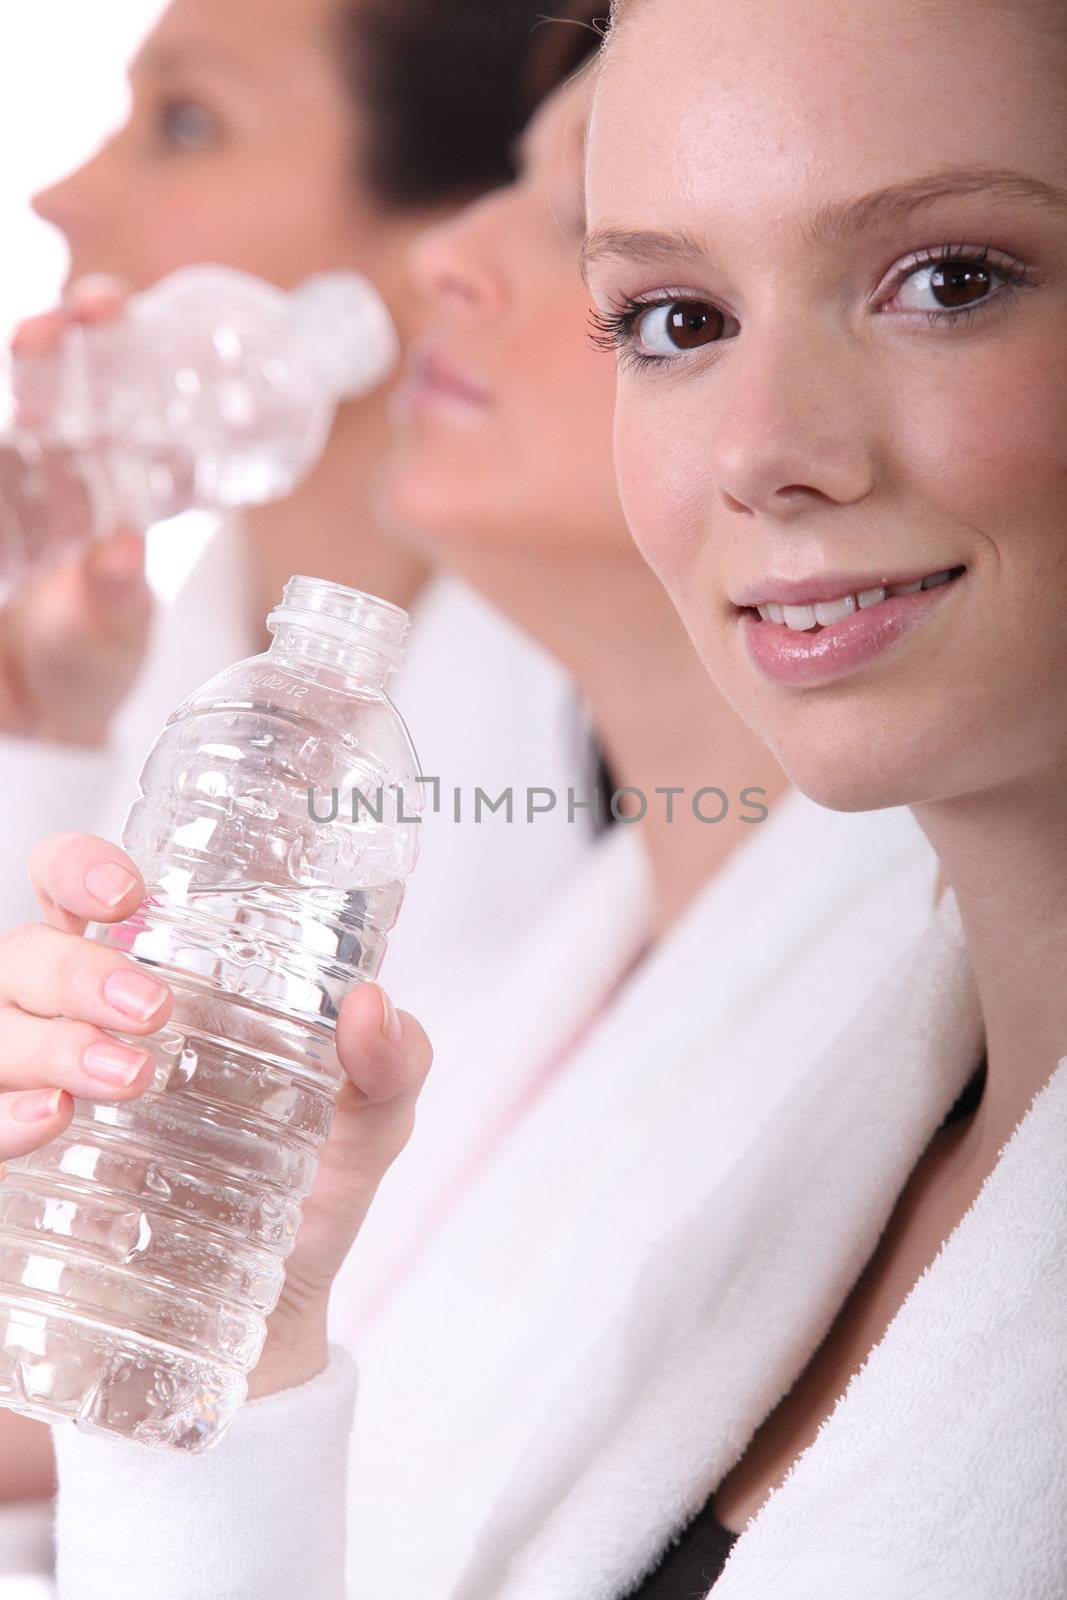 Women drinking water after a workout by phovoir